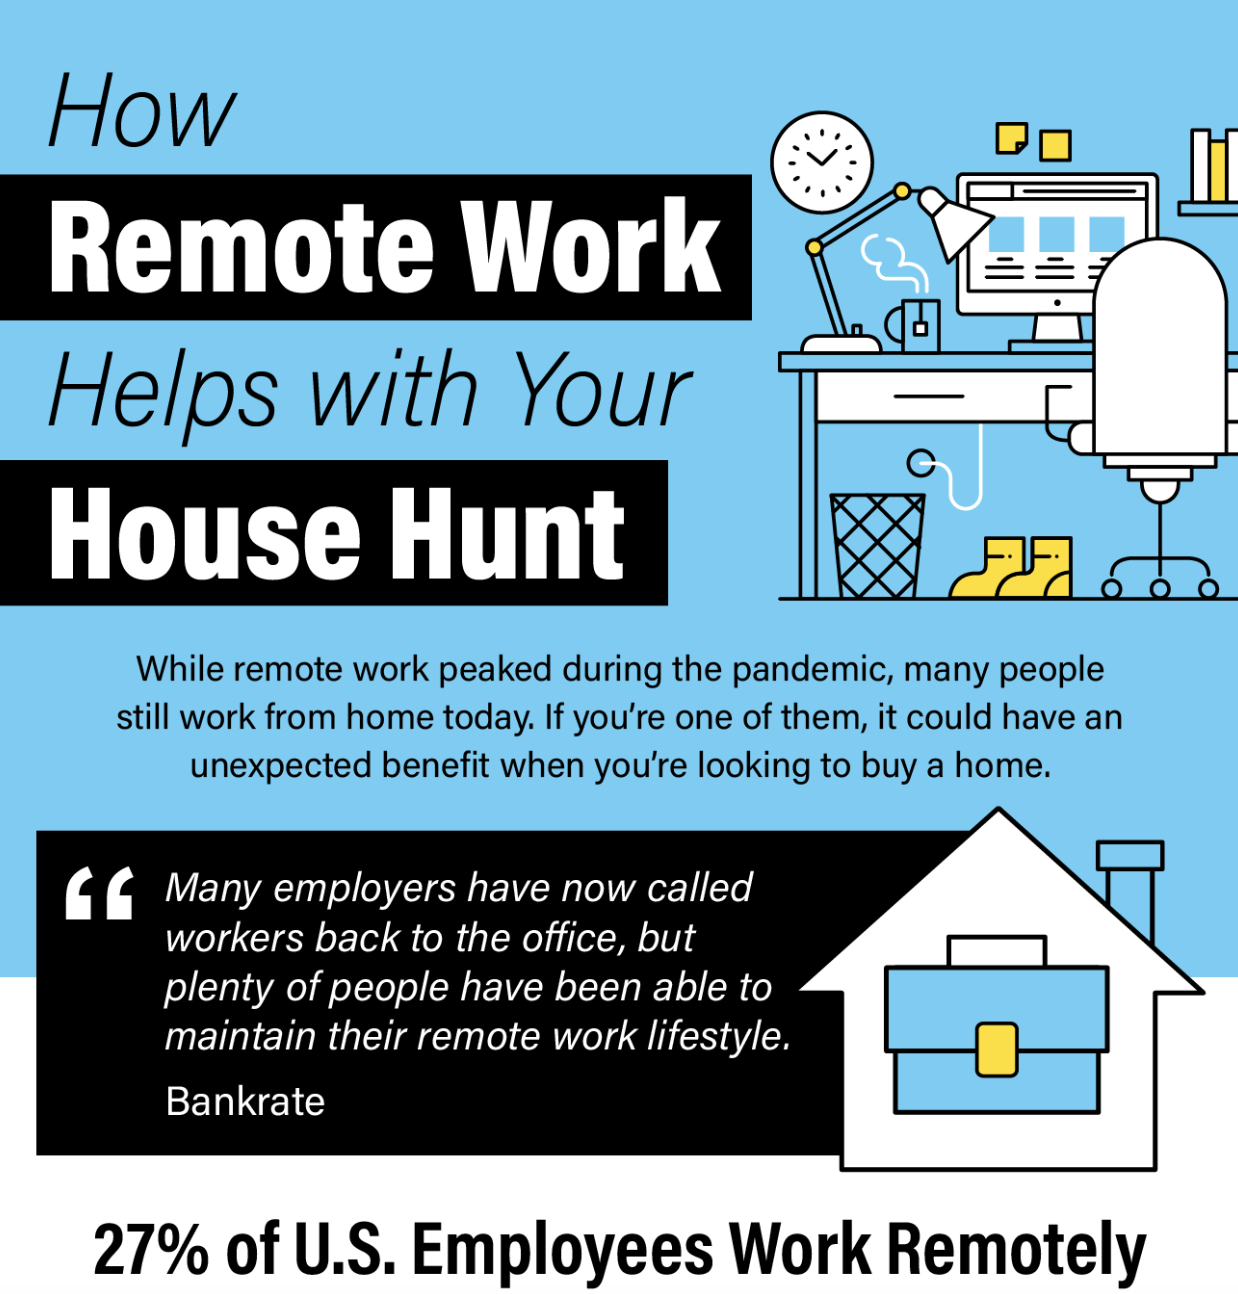 Remote Work Is Changing How Some Buyers Search for Their Dream Homes